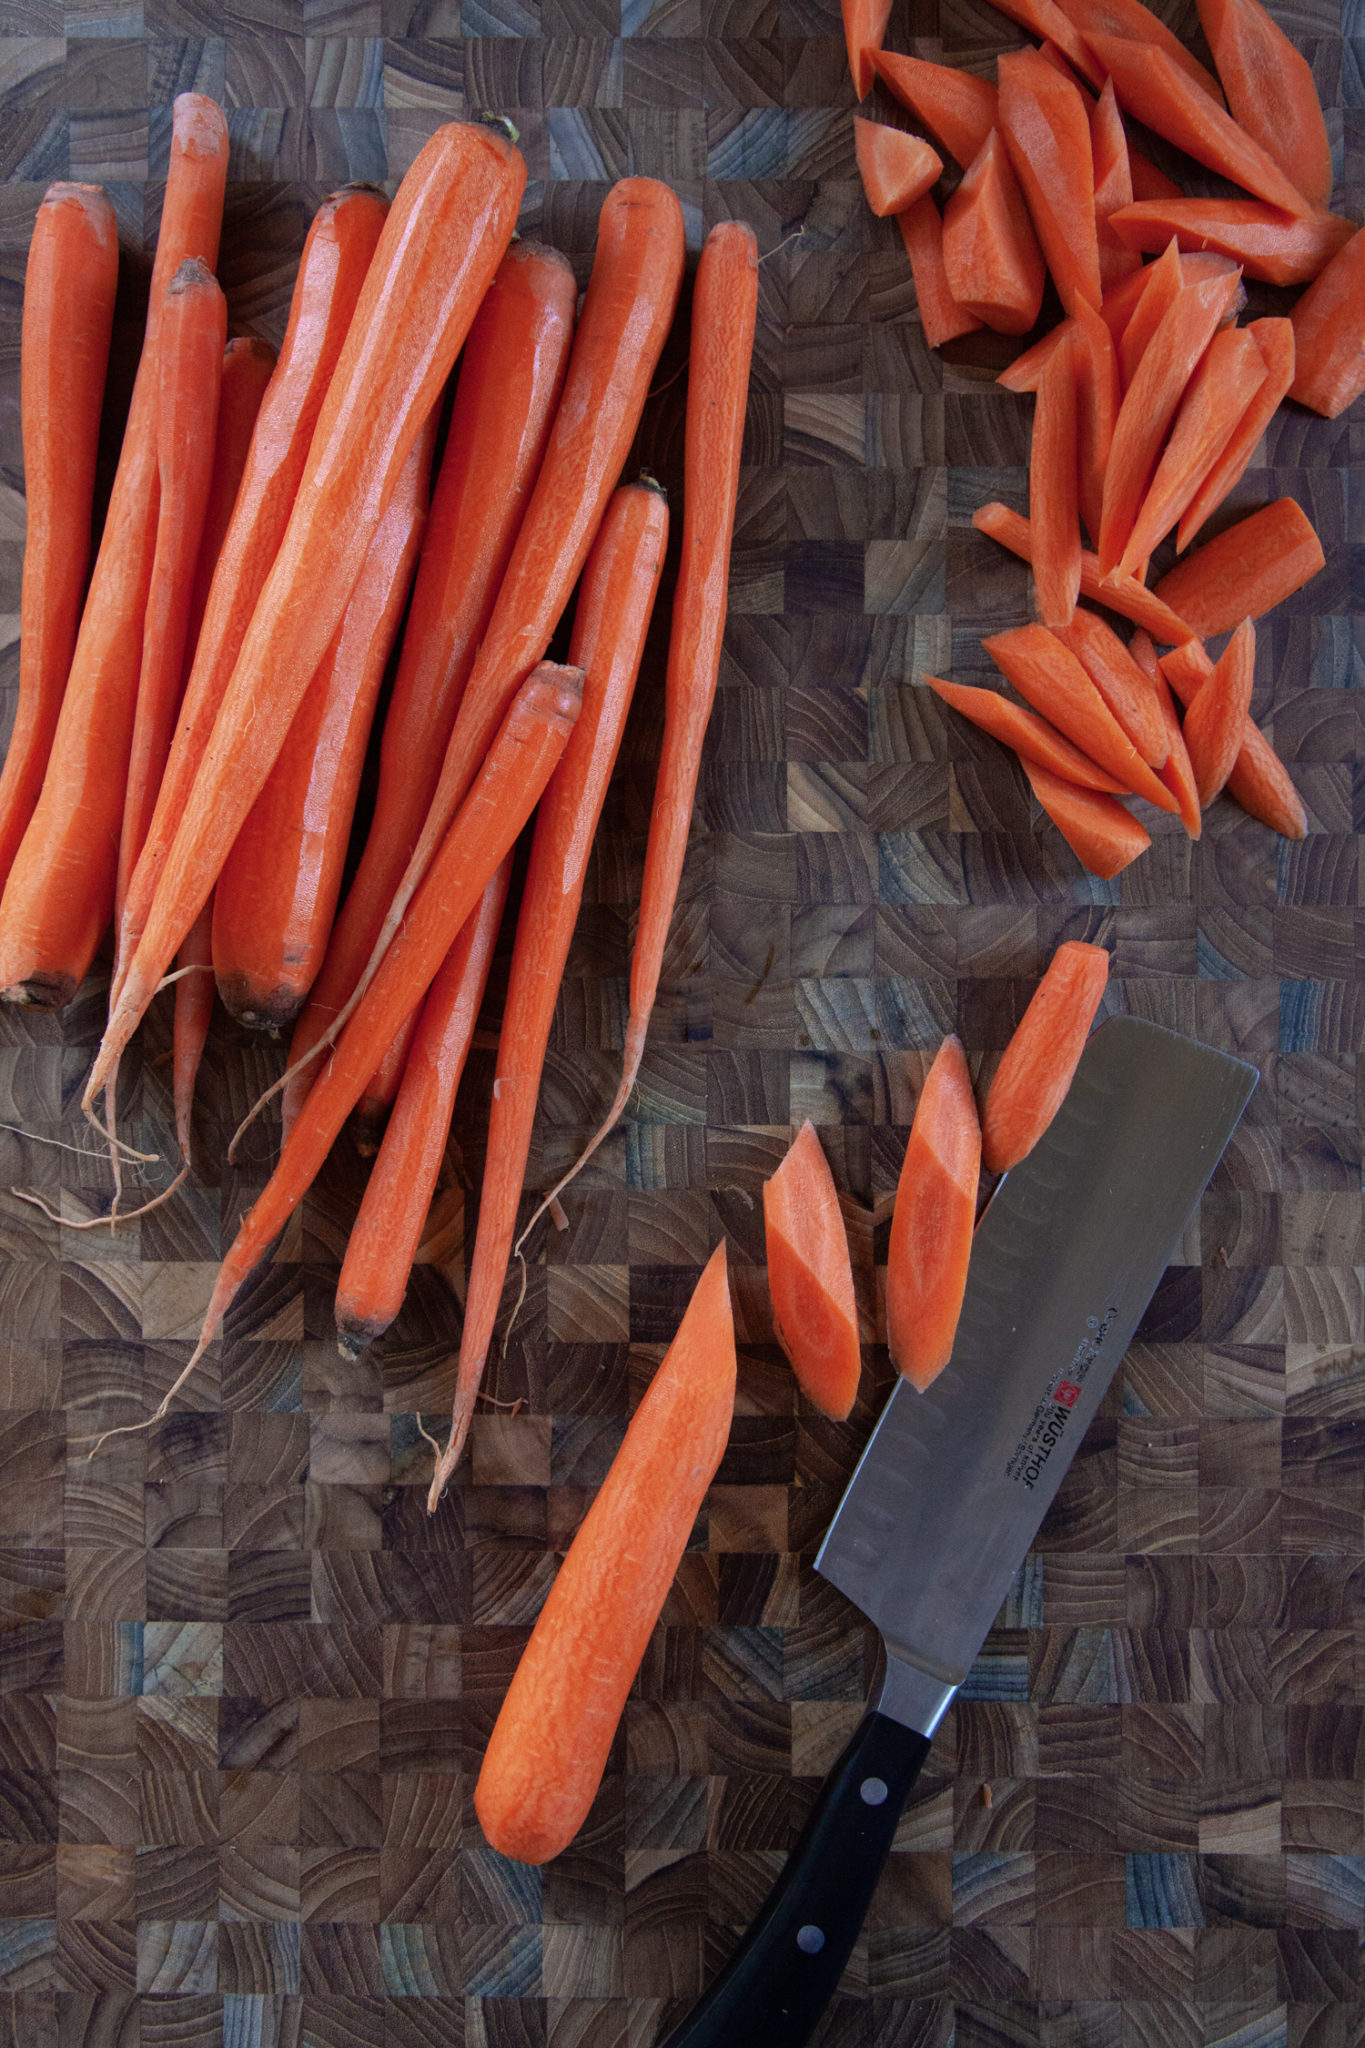 Chopped carrots on a cutting board.